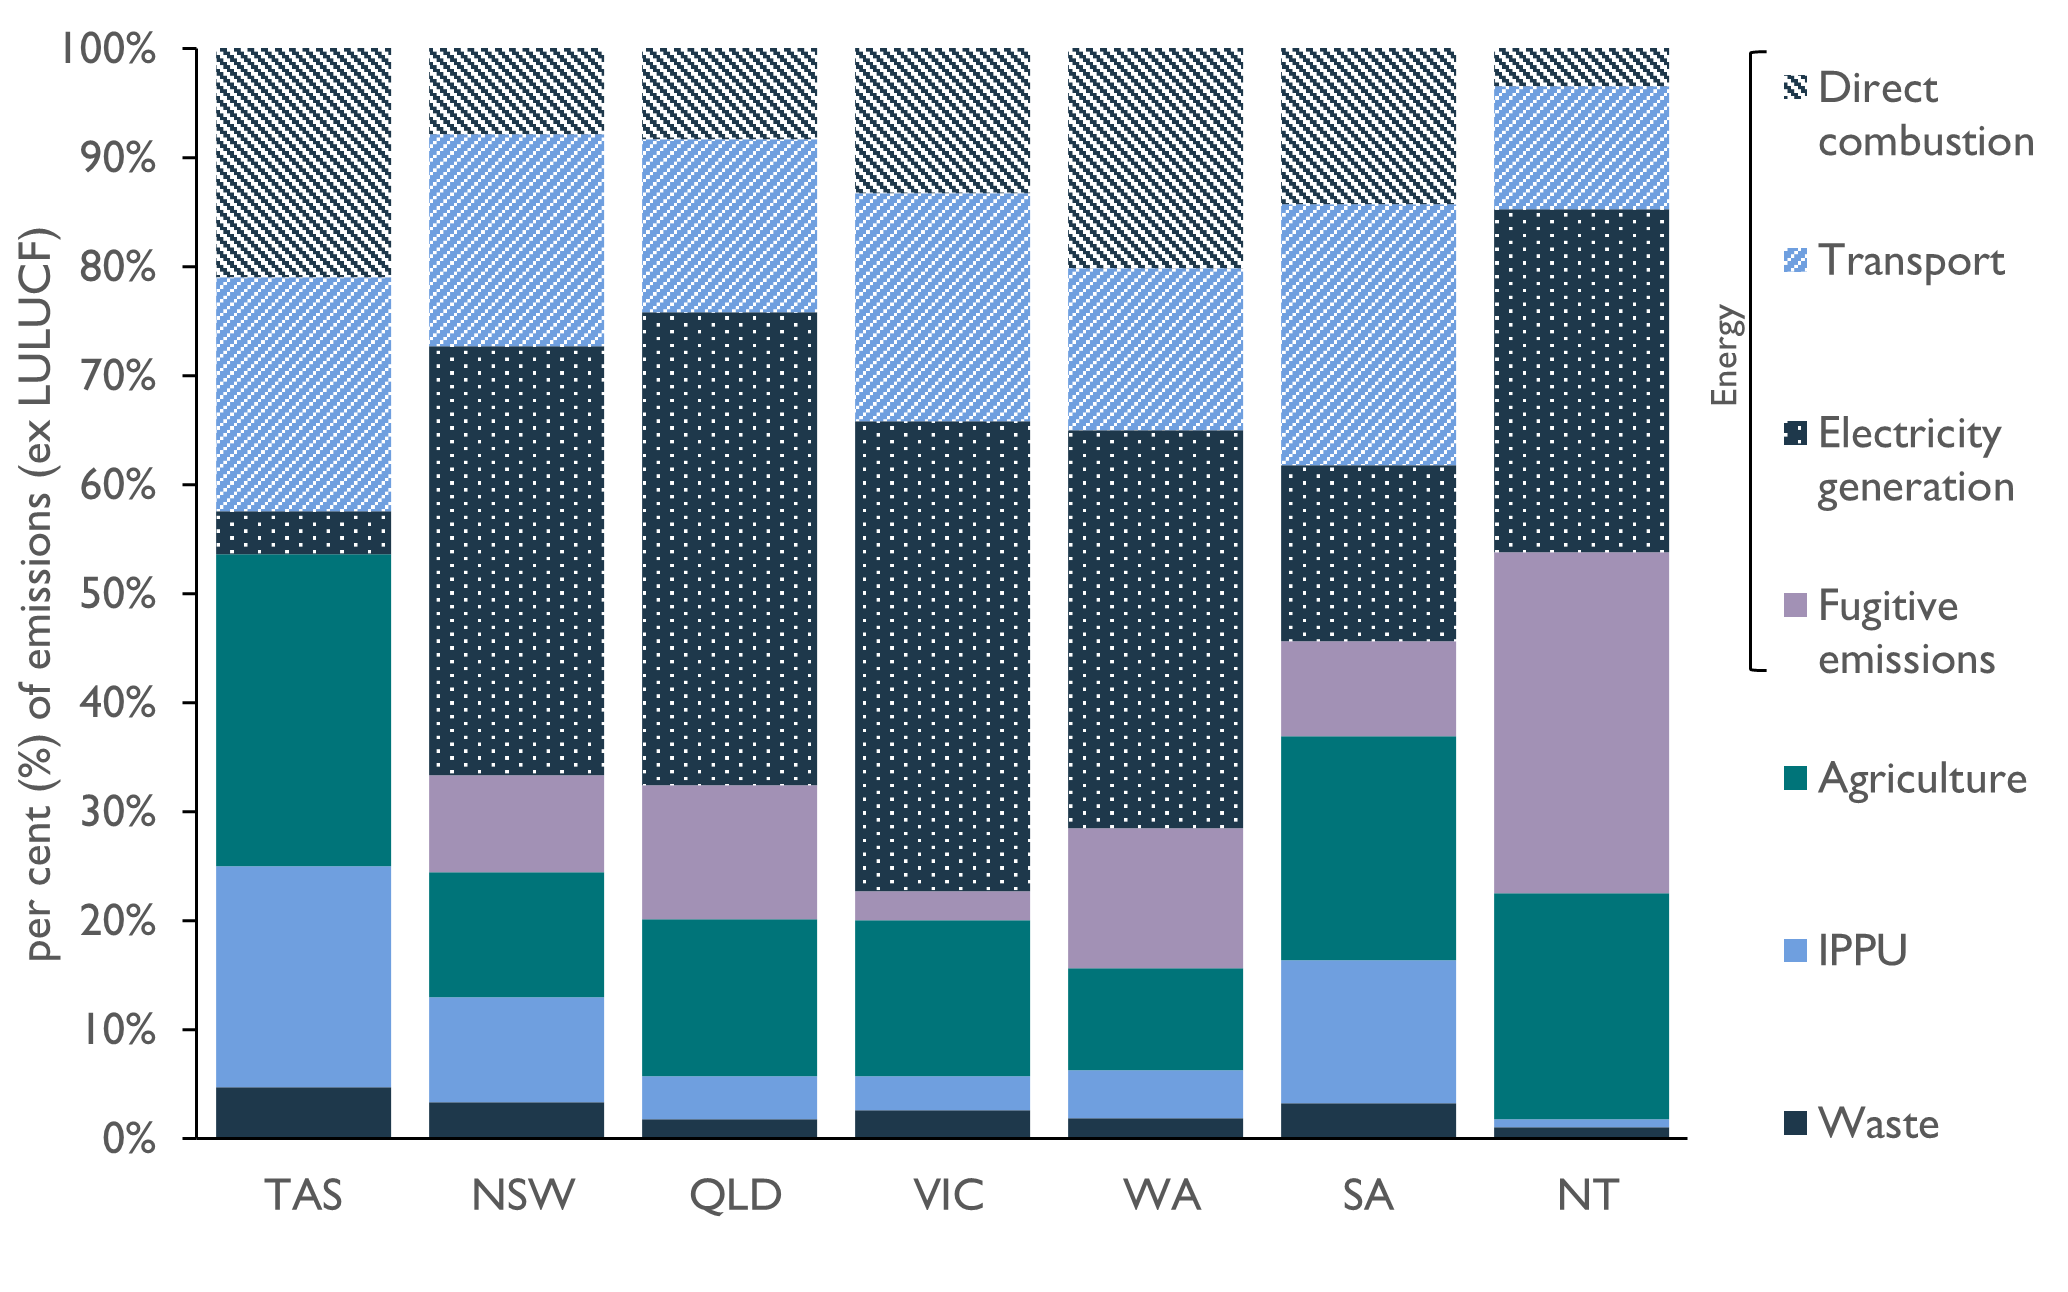 This figure is a stacked bar chart that highlights the differences in the relative contribution of each sector and energy-subsector to an Australian state or territory's total emissions, excluding LULUCF. It shows that Tasmania's emissions profile differs from other Australian states and territories, with much lower contributions from the electricity generation sub-sector to Tasmania's total emissions (1.6 per cent share of total emissions). In contrast, it shows that electricity generation is the largest source of emissions in Victoria (55.3 per cent), Queensland (42.9 per cent), New South Wales (38.3 per cent), WA (41.8 per cent), and the NT (41.7 per cent). Transport and agriculture are the largest sub-sectors in SA (28.5 per cent and 28.3 per cent respectively). The figure also shows that emissions from Tasmania's transport (21.0 per cent), direct combustion (20.9 per cent), IPPU (18.7 per cent) and agriculture (33.1 per cent) sectors make a larger relative contribution to the state's total emissions than in most other jurisdictions.